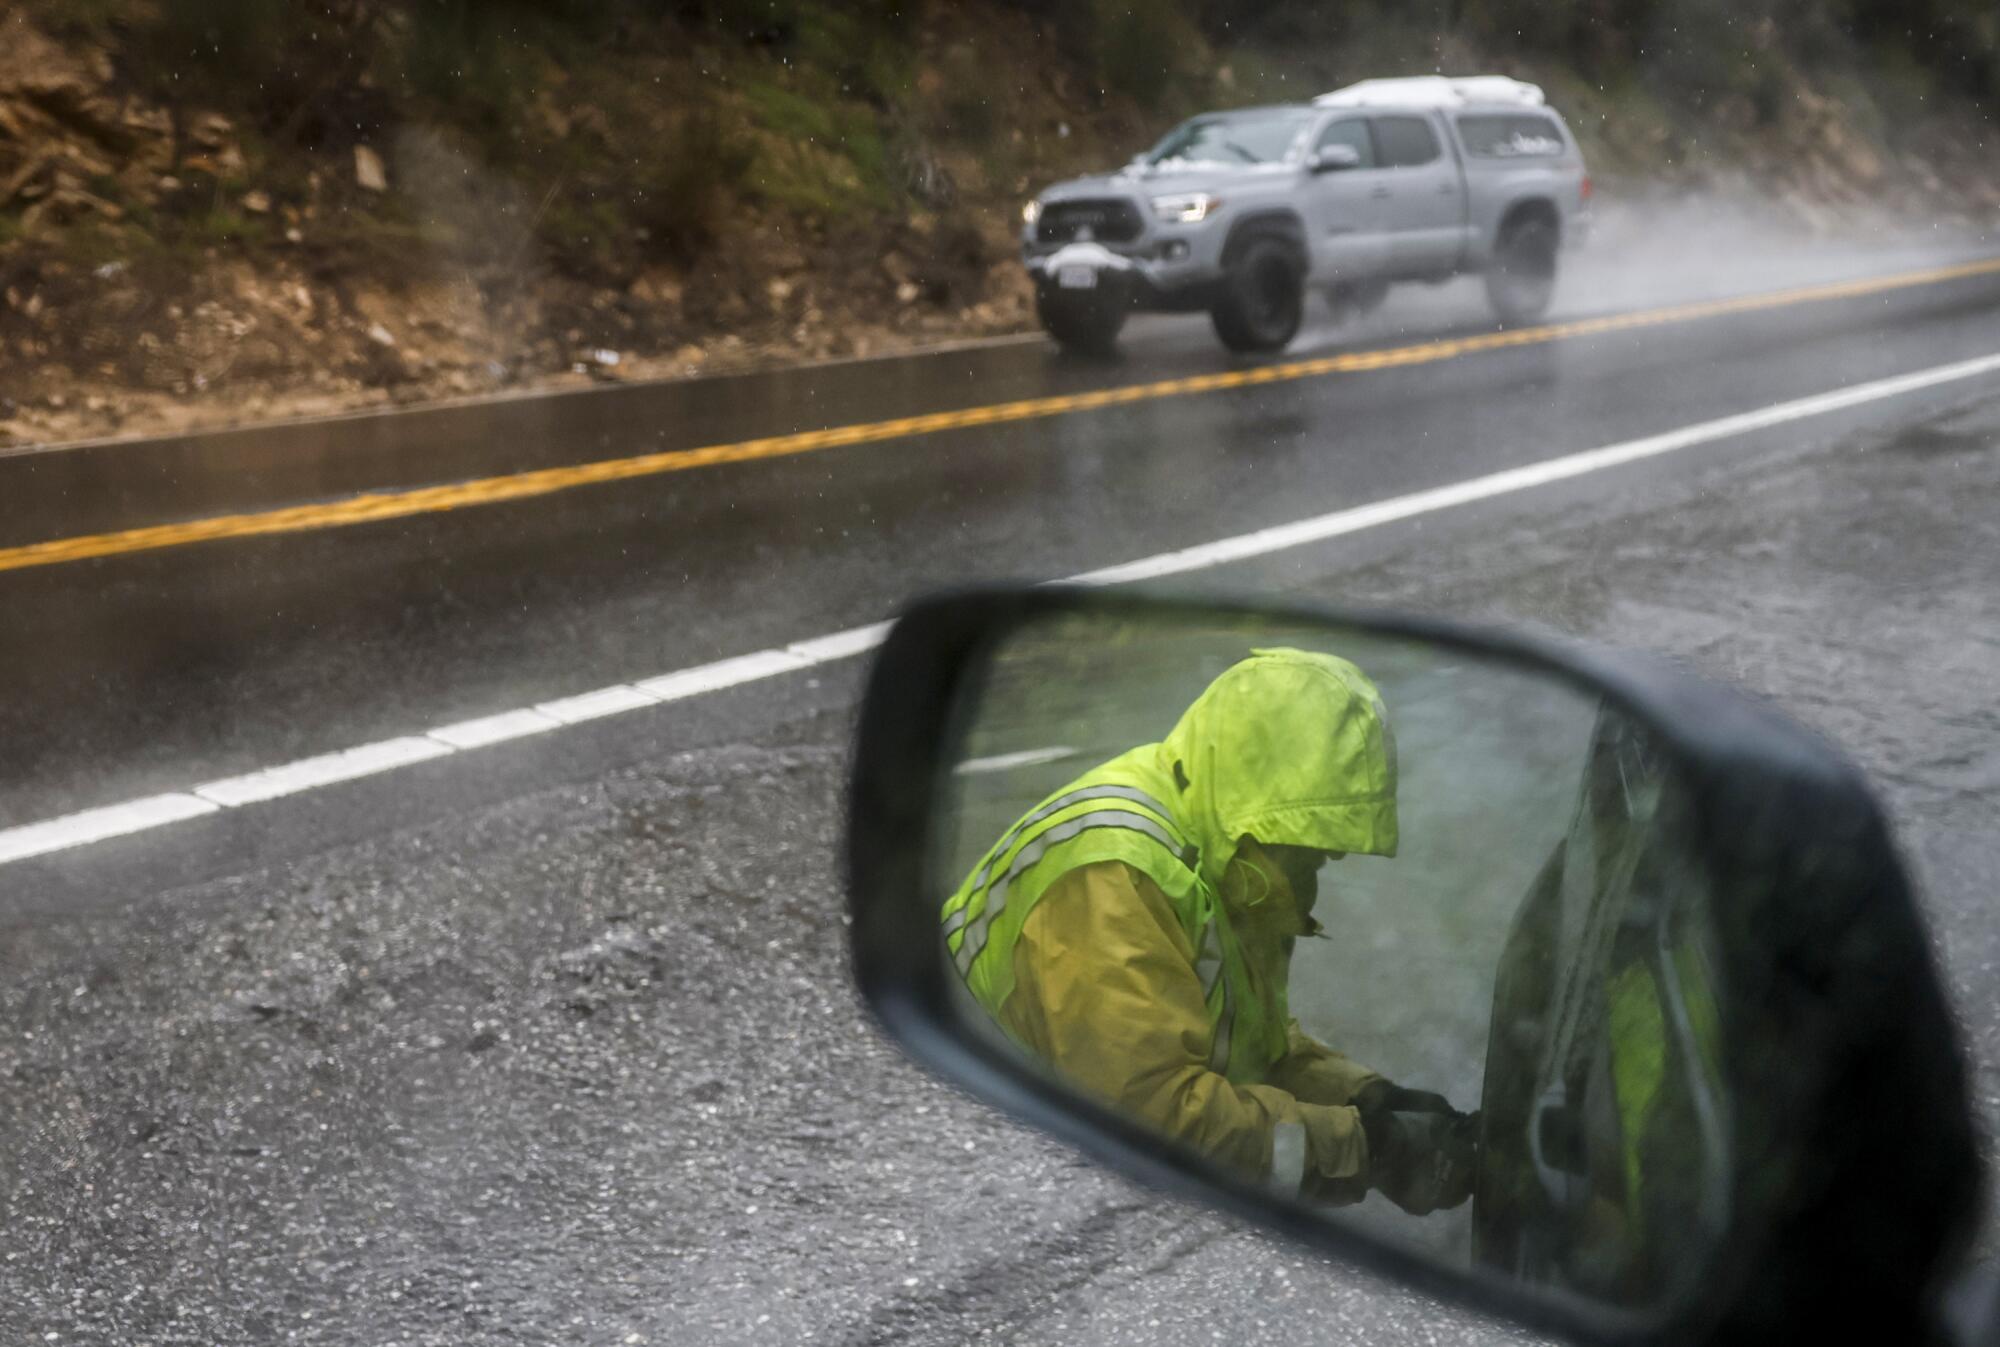 Chain installer Bill Siples at work along State Highway 330 on the way to Big Bear